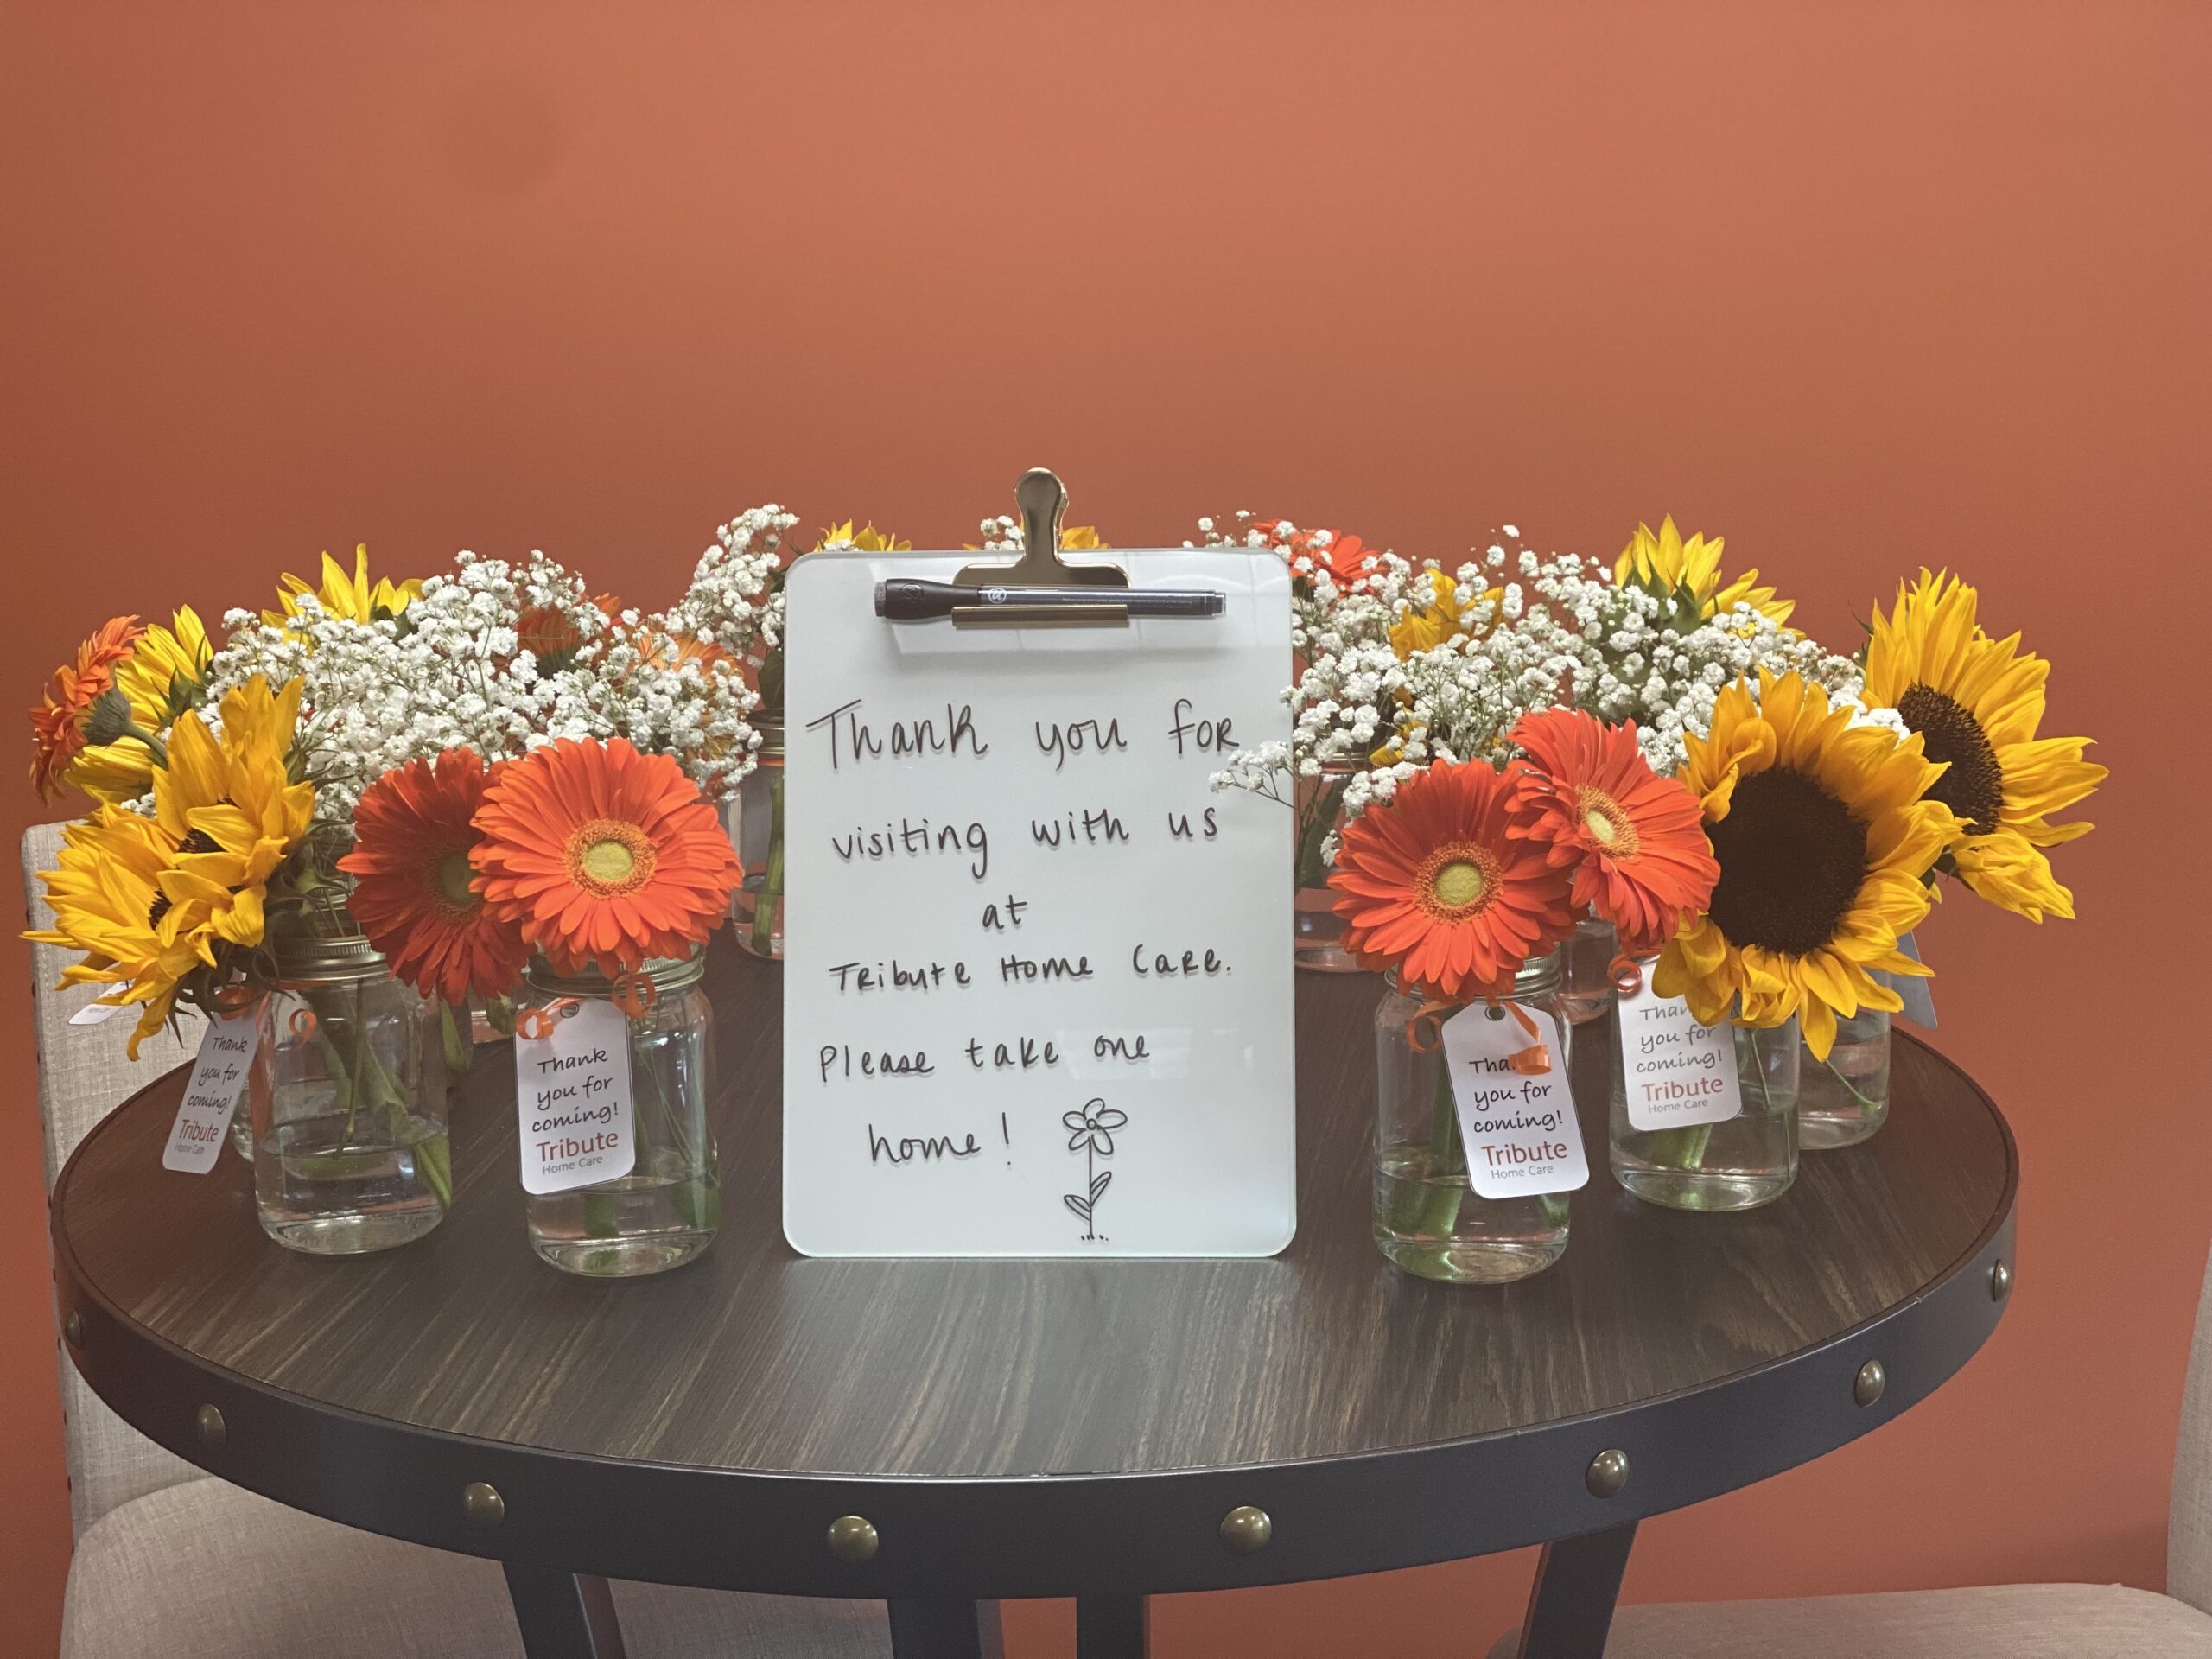 Beautiful flowers in glass mason jars on brown wood table from Tribute. "Thank you for visiting with us at Tribute Home Care. Please take one home!"